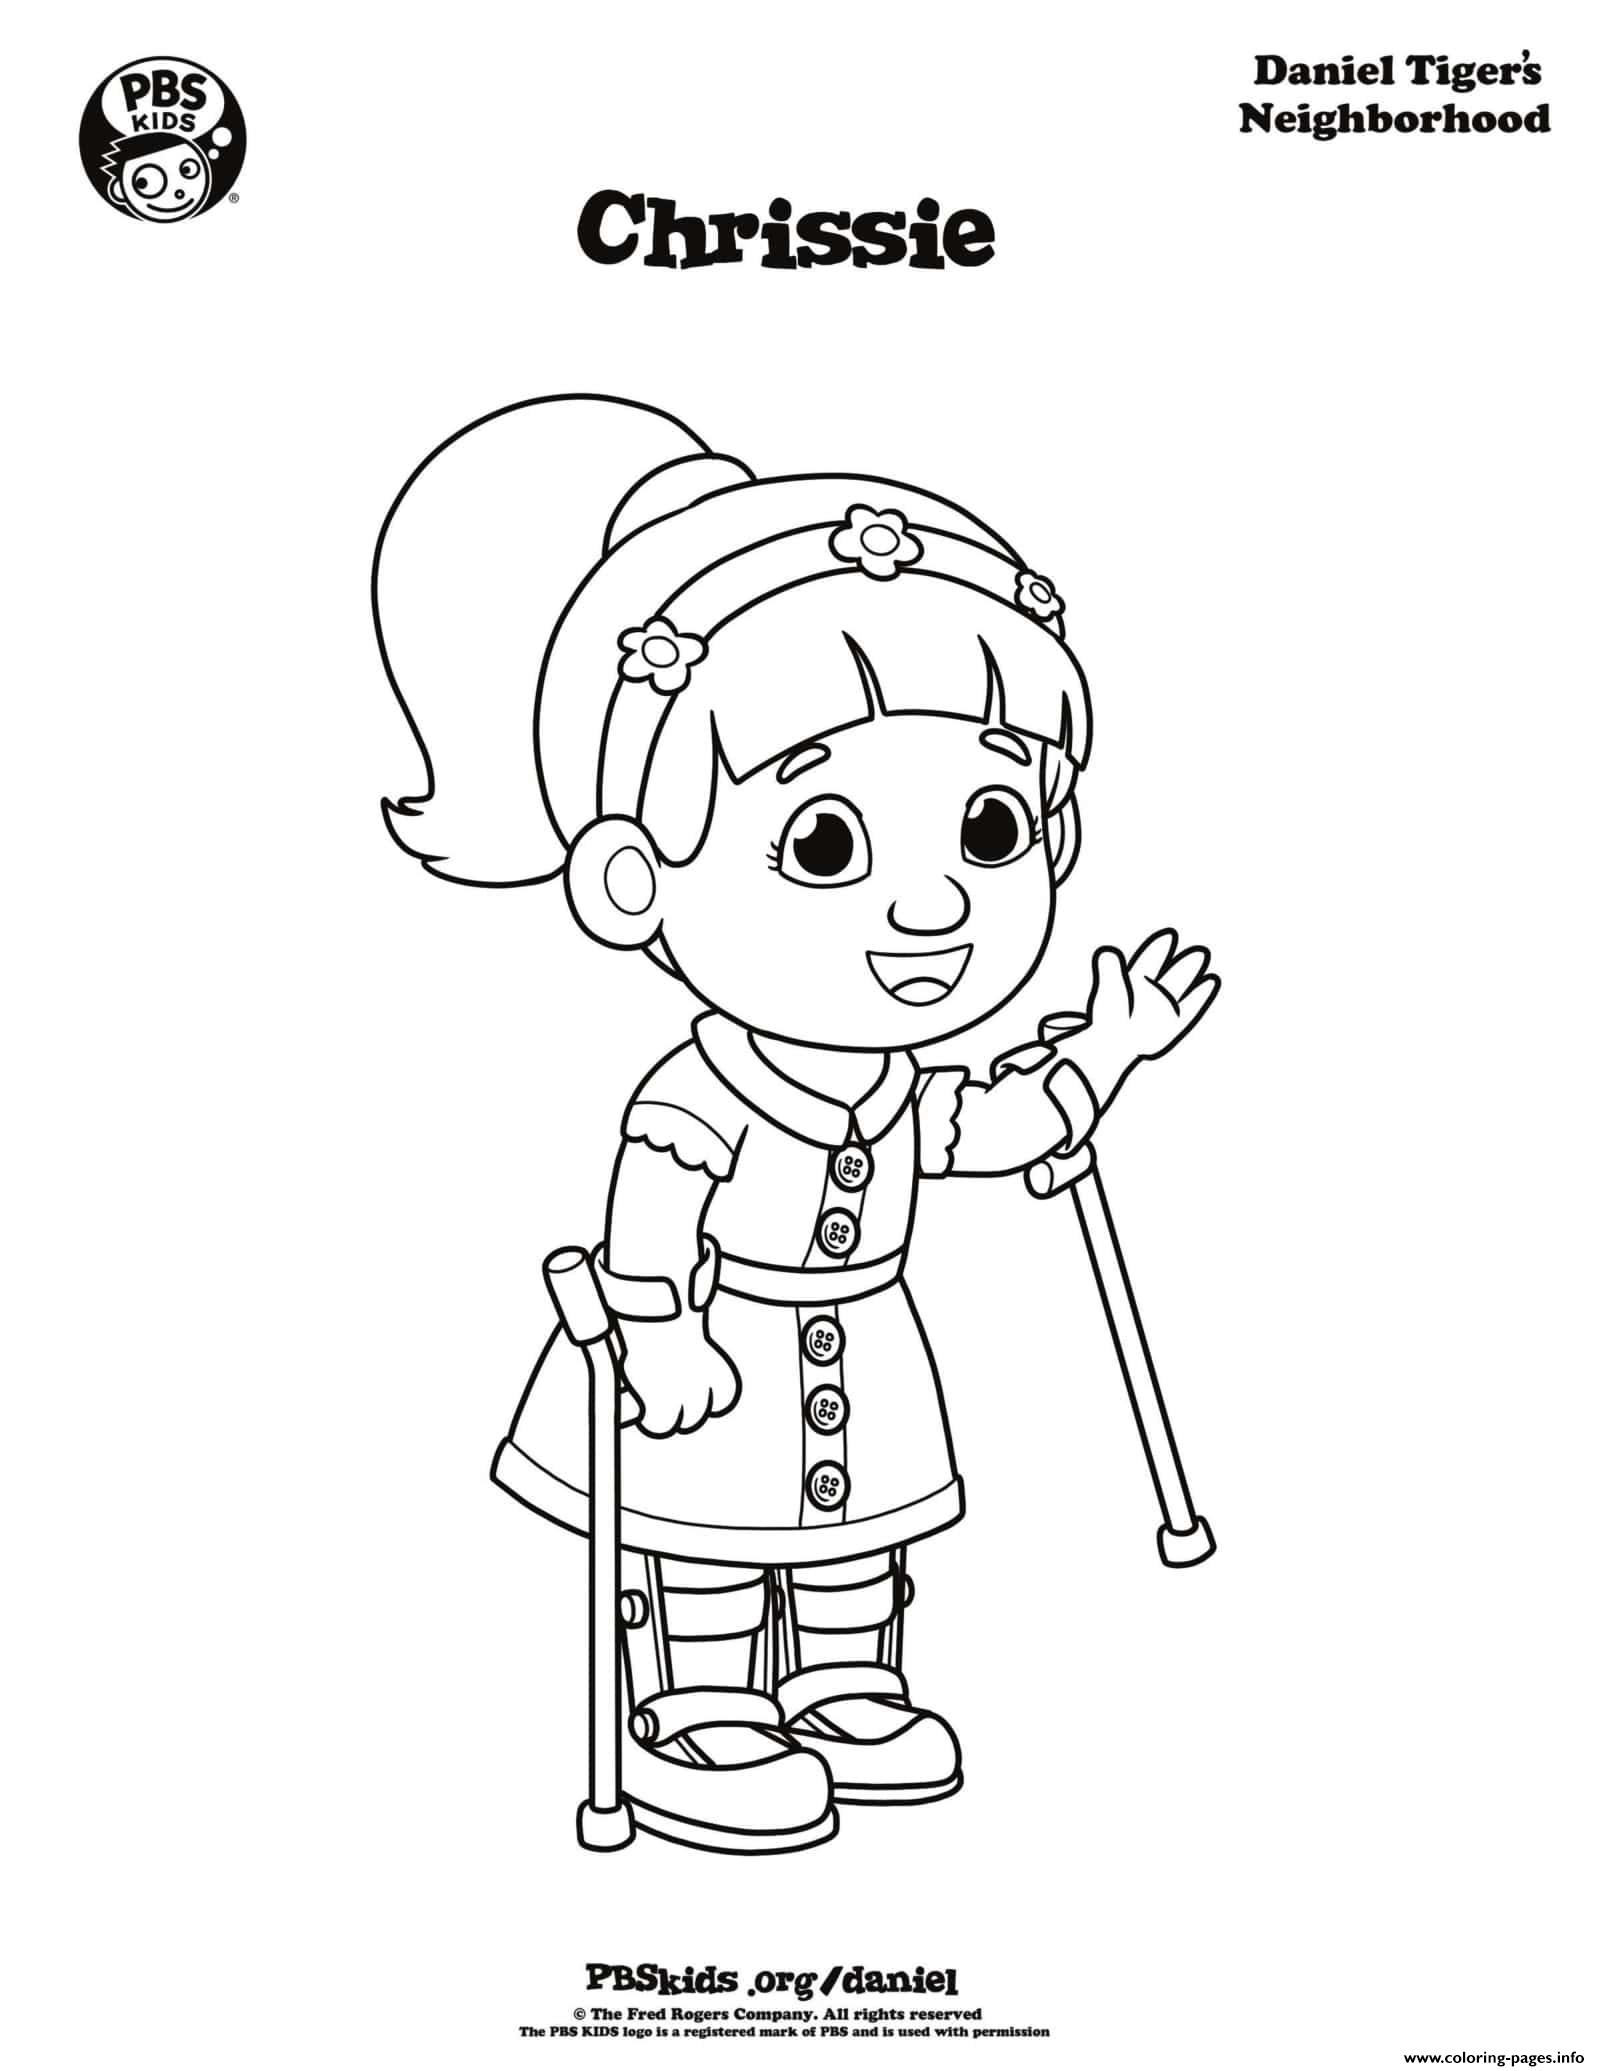 Chrissie Daniel Tiger Min Coloring Pages Printable